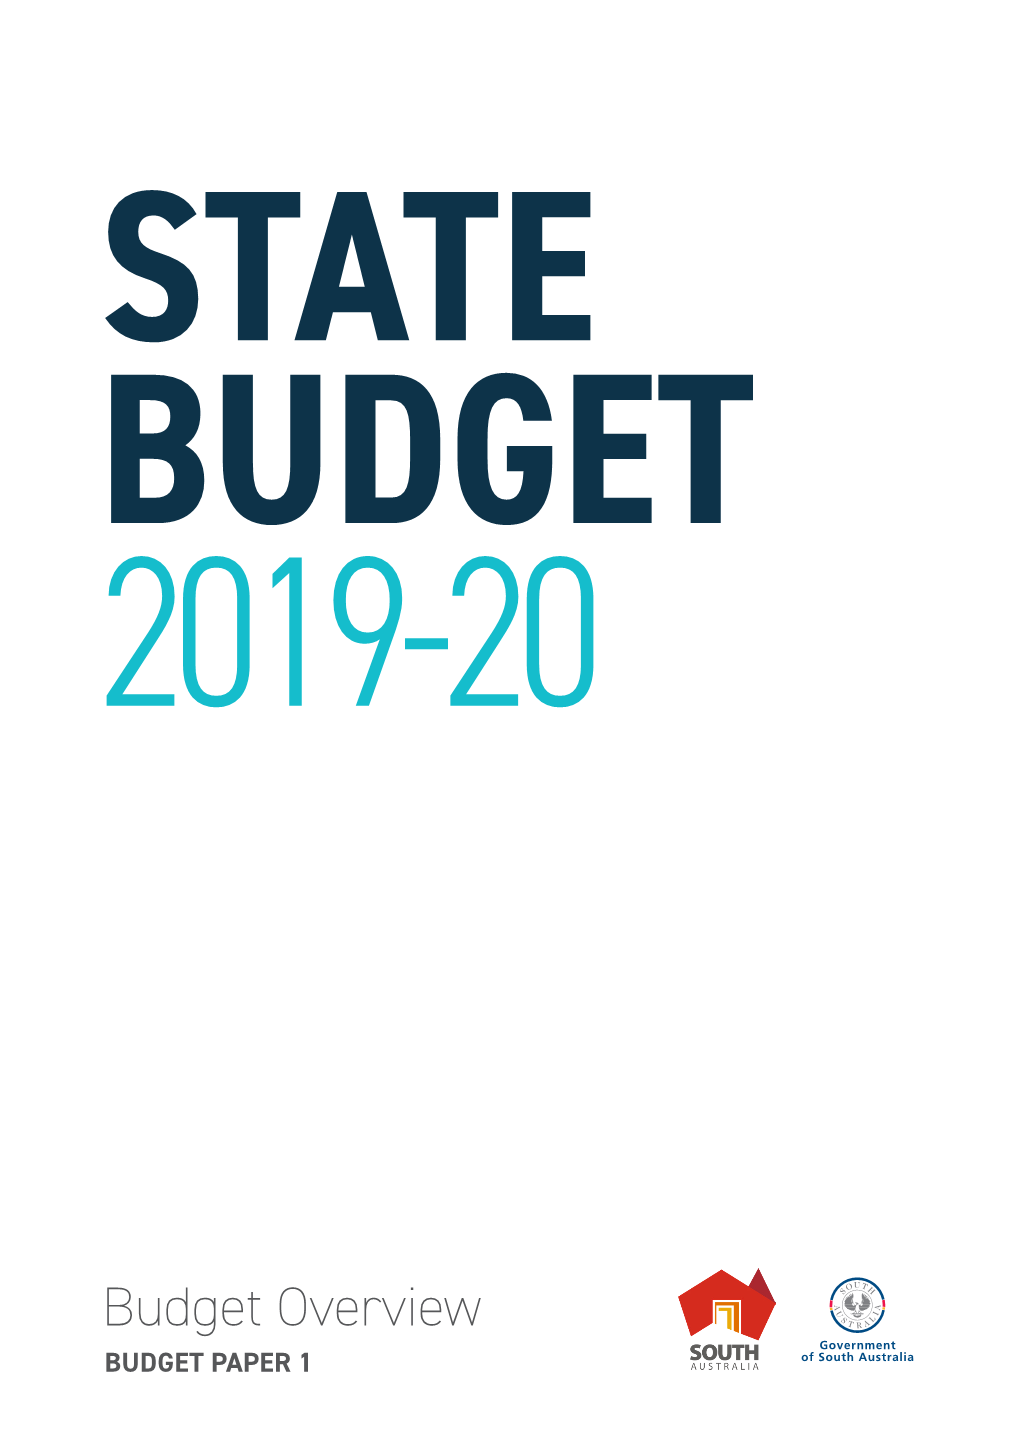 Budget Overview BUDGET PAPER 1 STATE BUDGET 2019-20